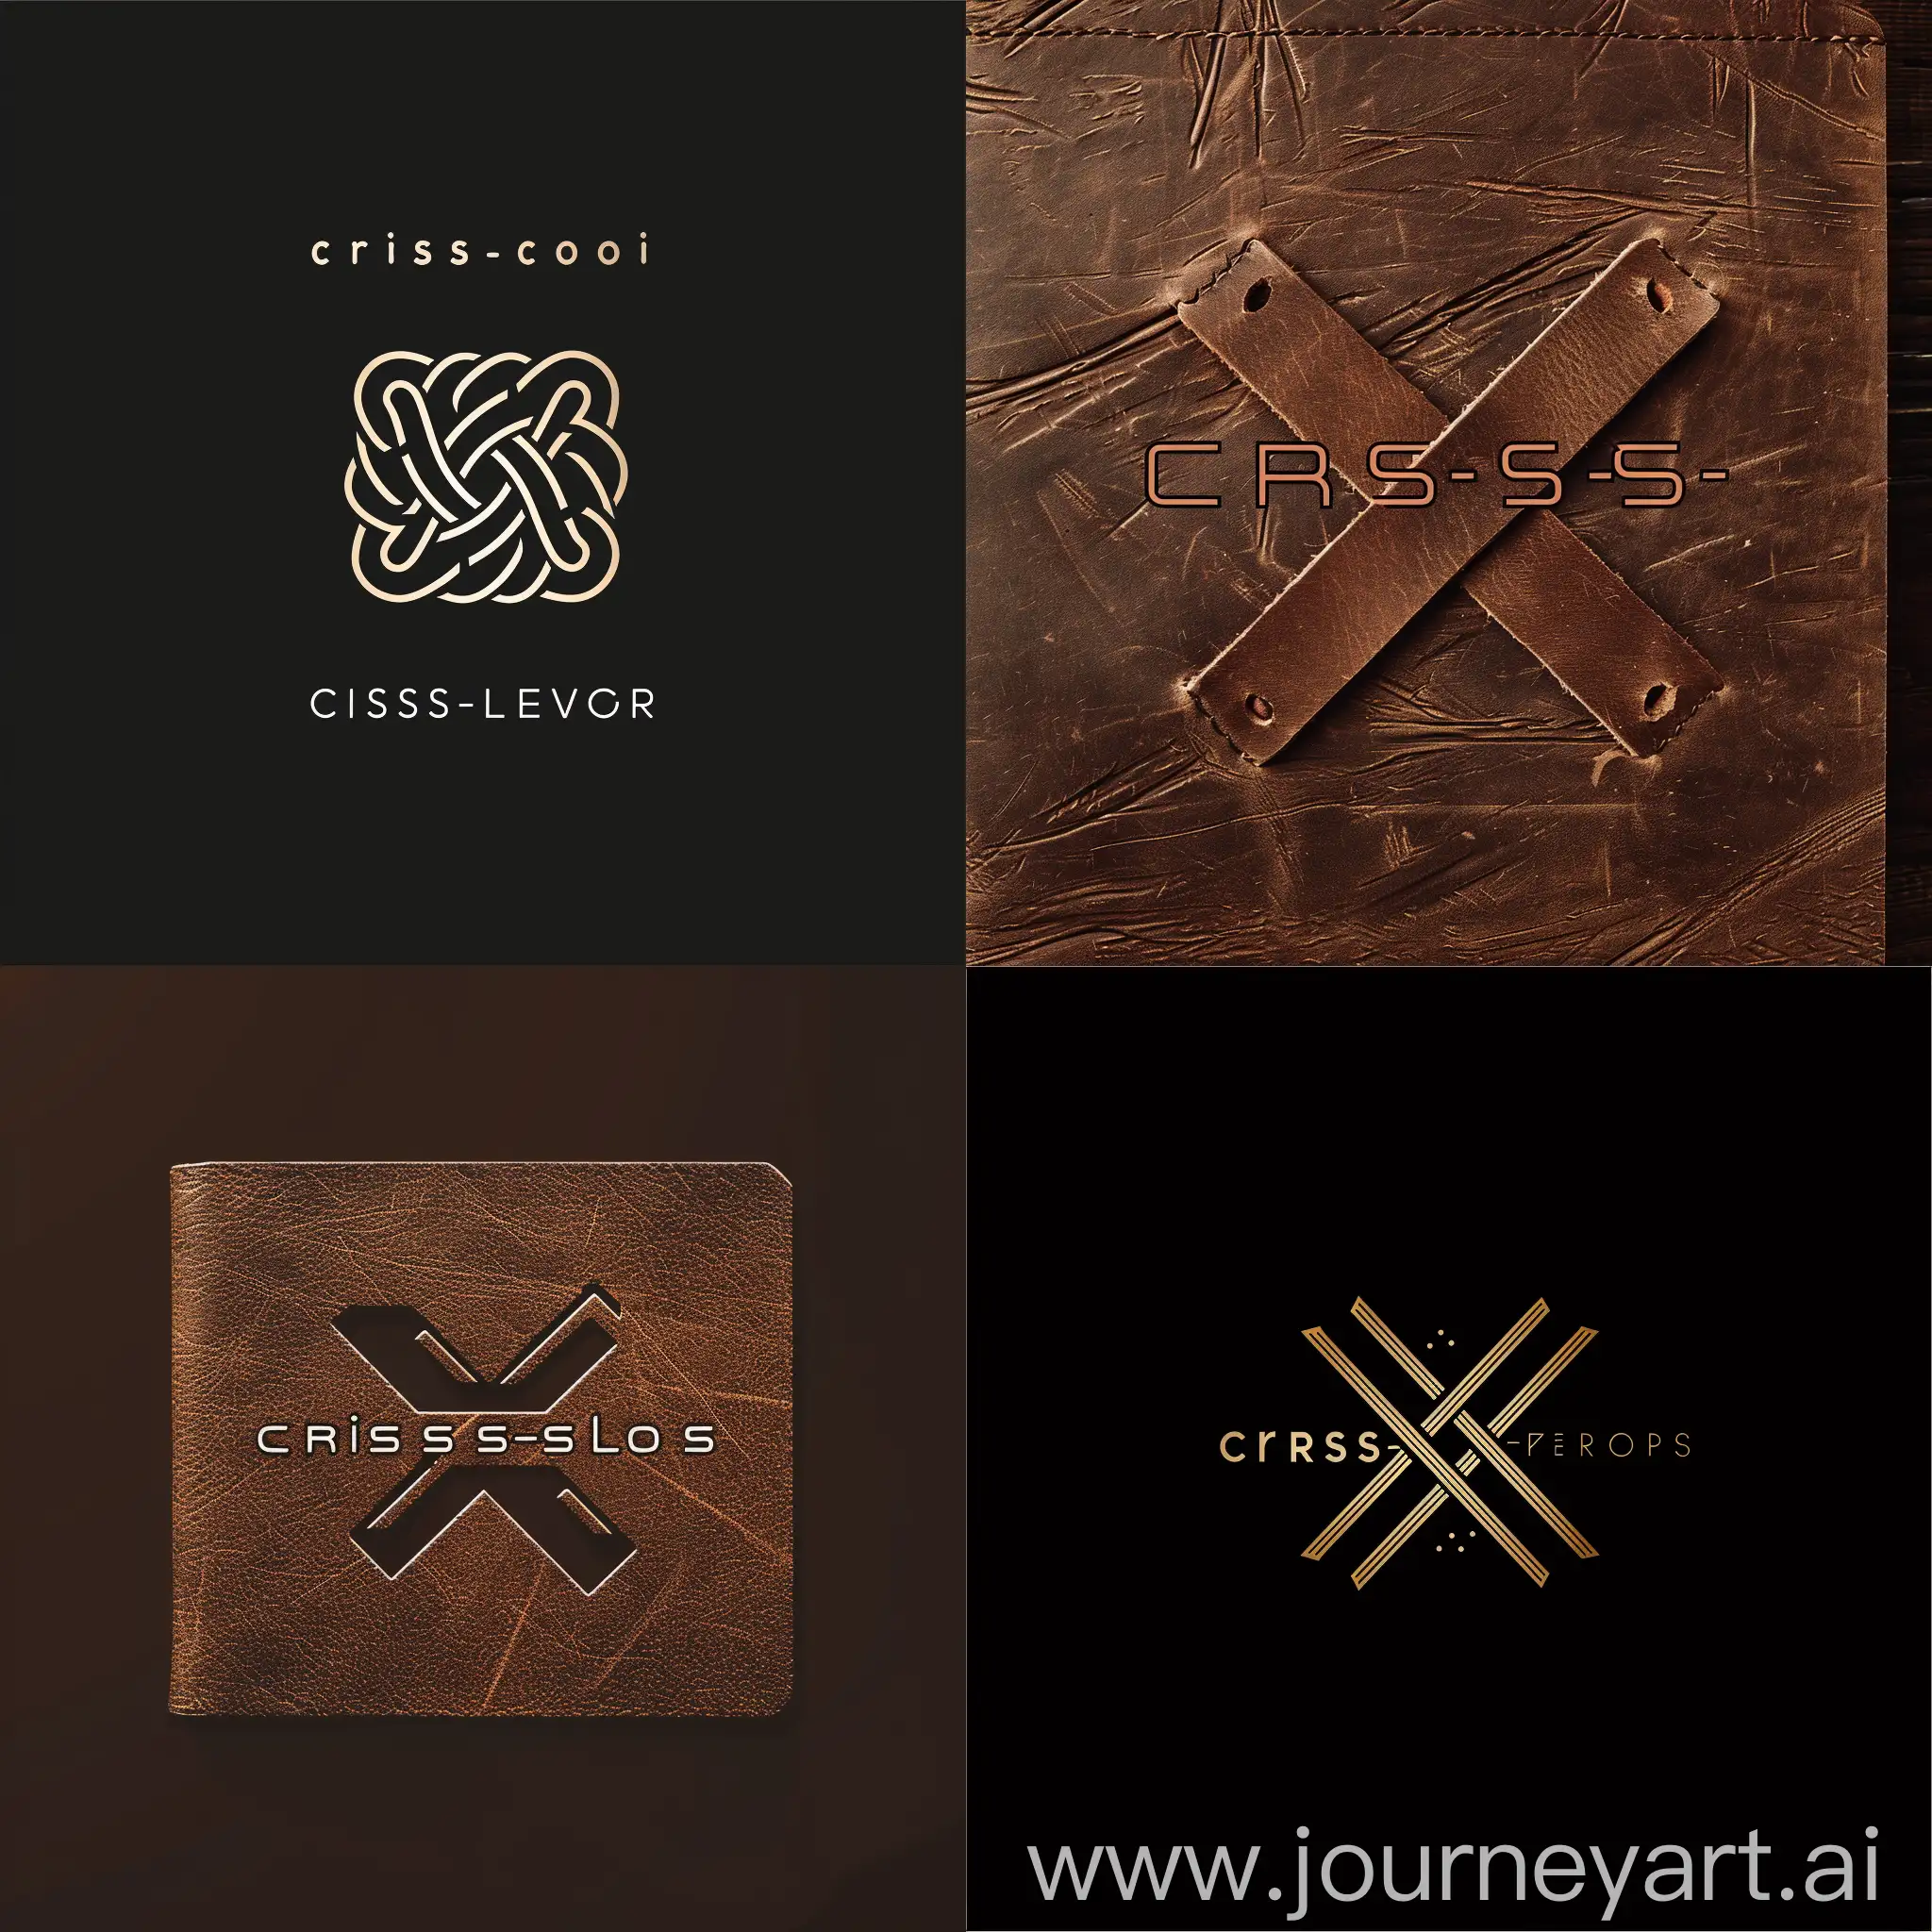 A logo for a company that produces unique handmade leather goods in street style, name is "criss-cross"
